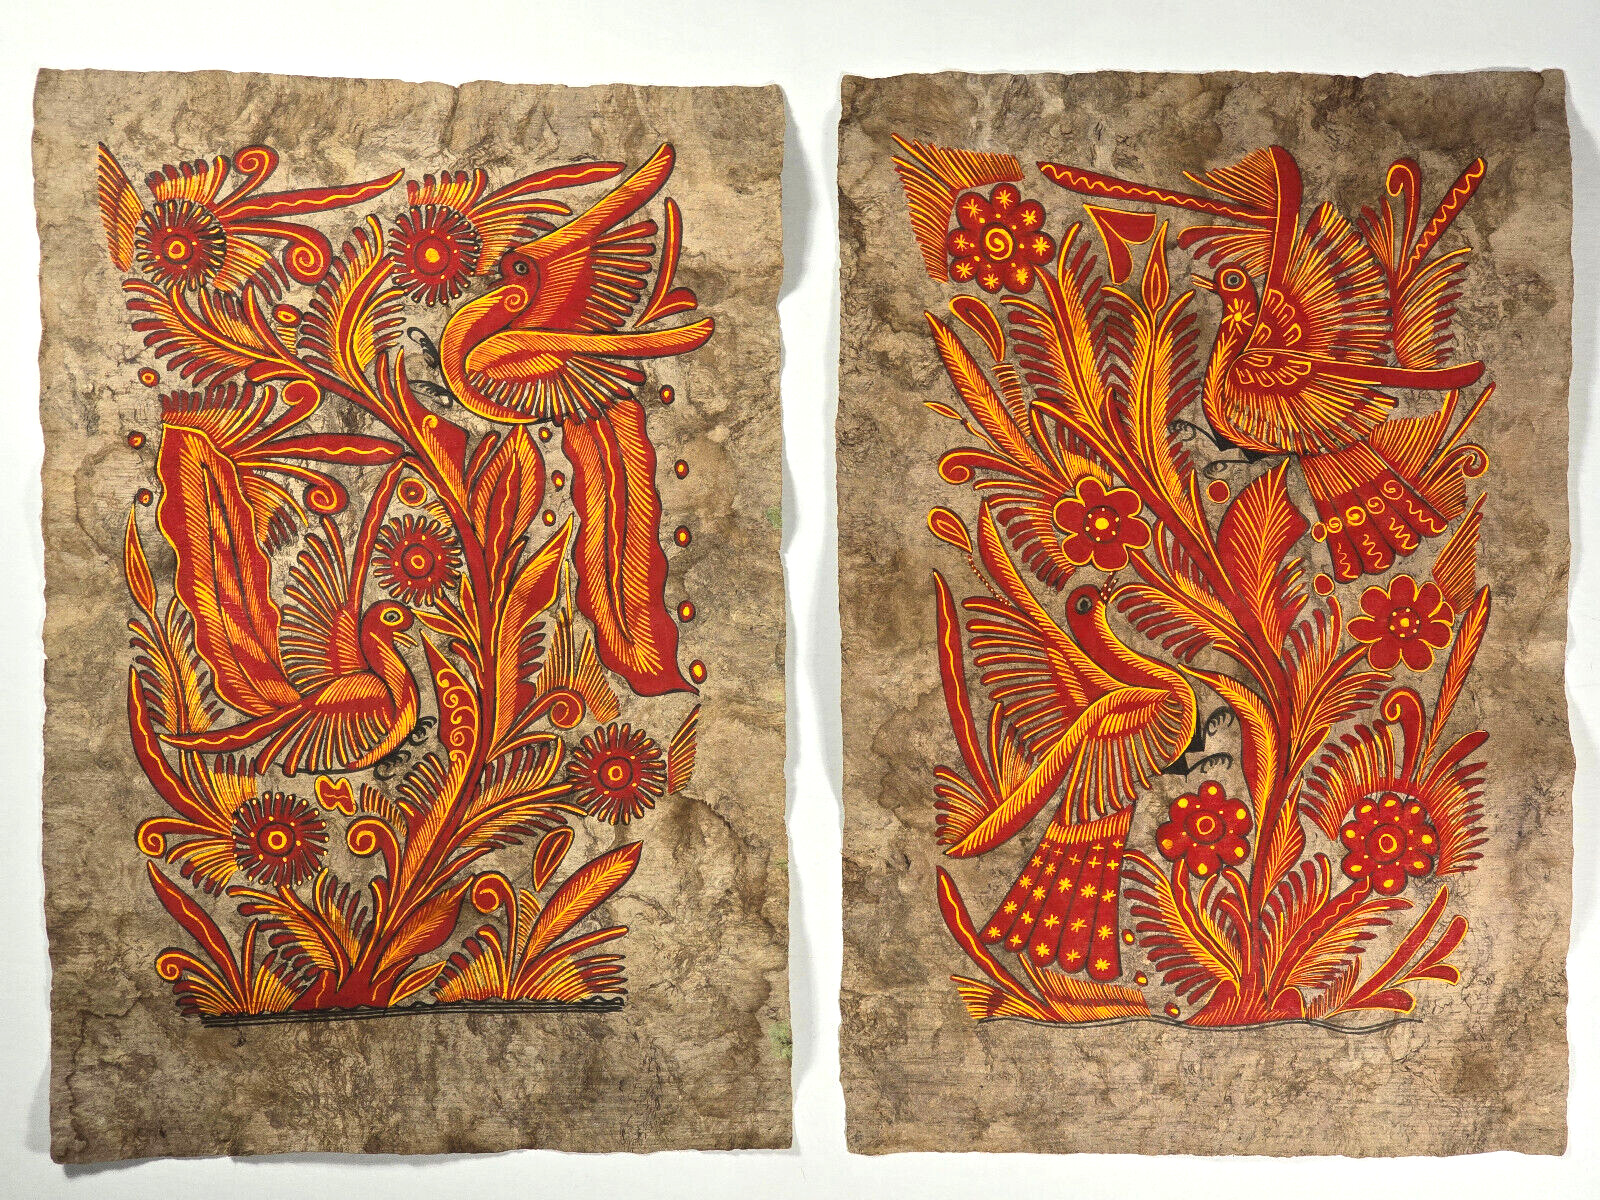 Matching Set of 2 Mexican Folk Art Floral Bird Paintings on Amate Bark Mexico